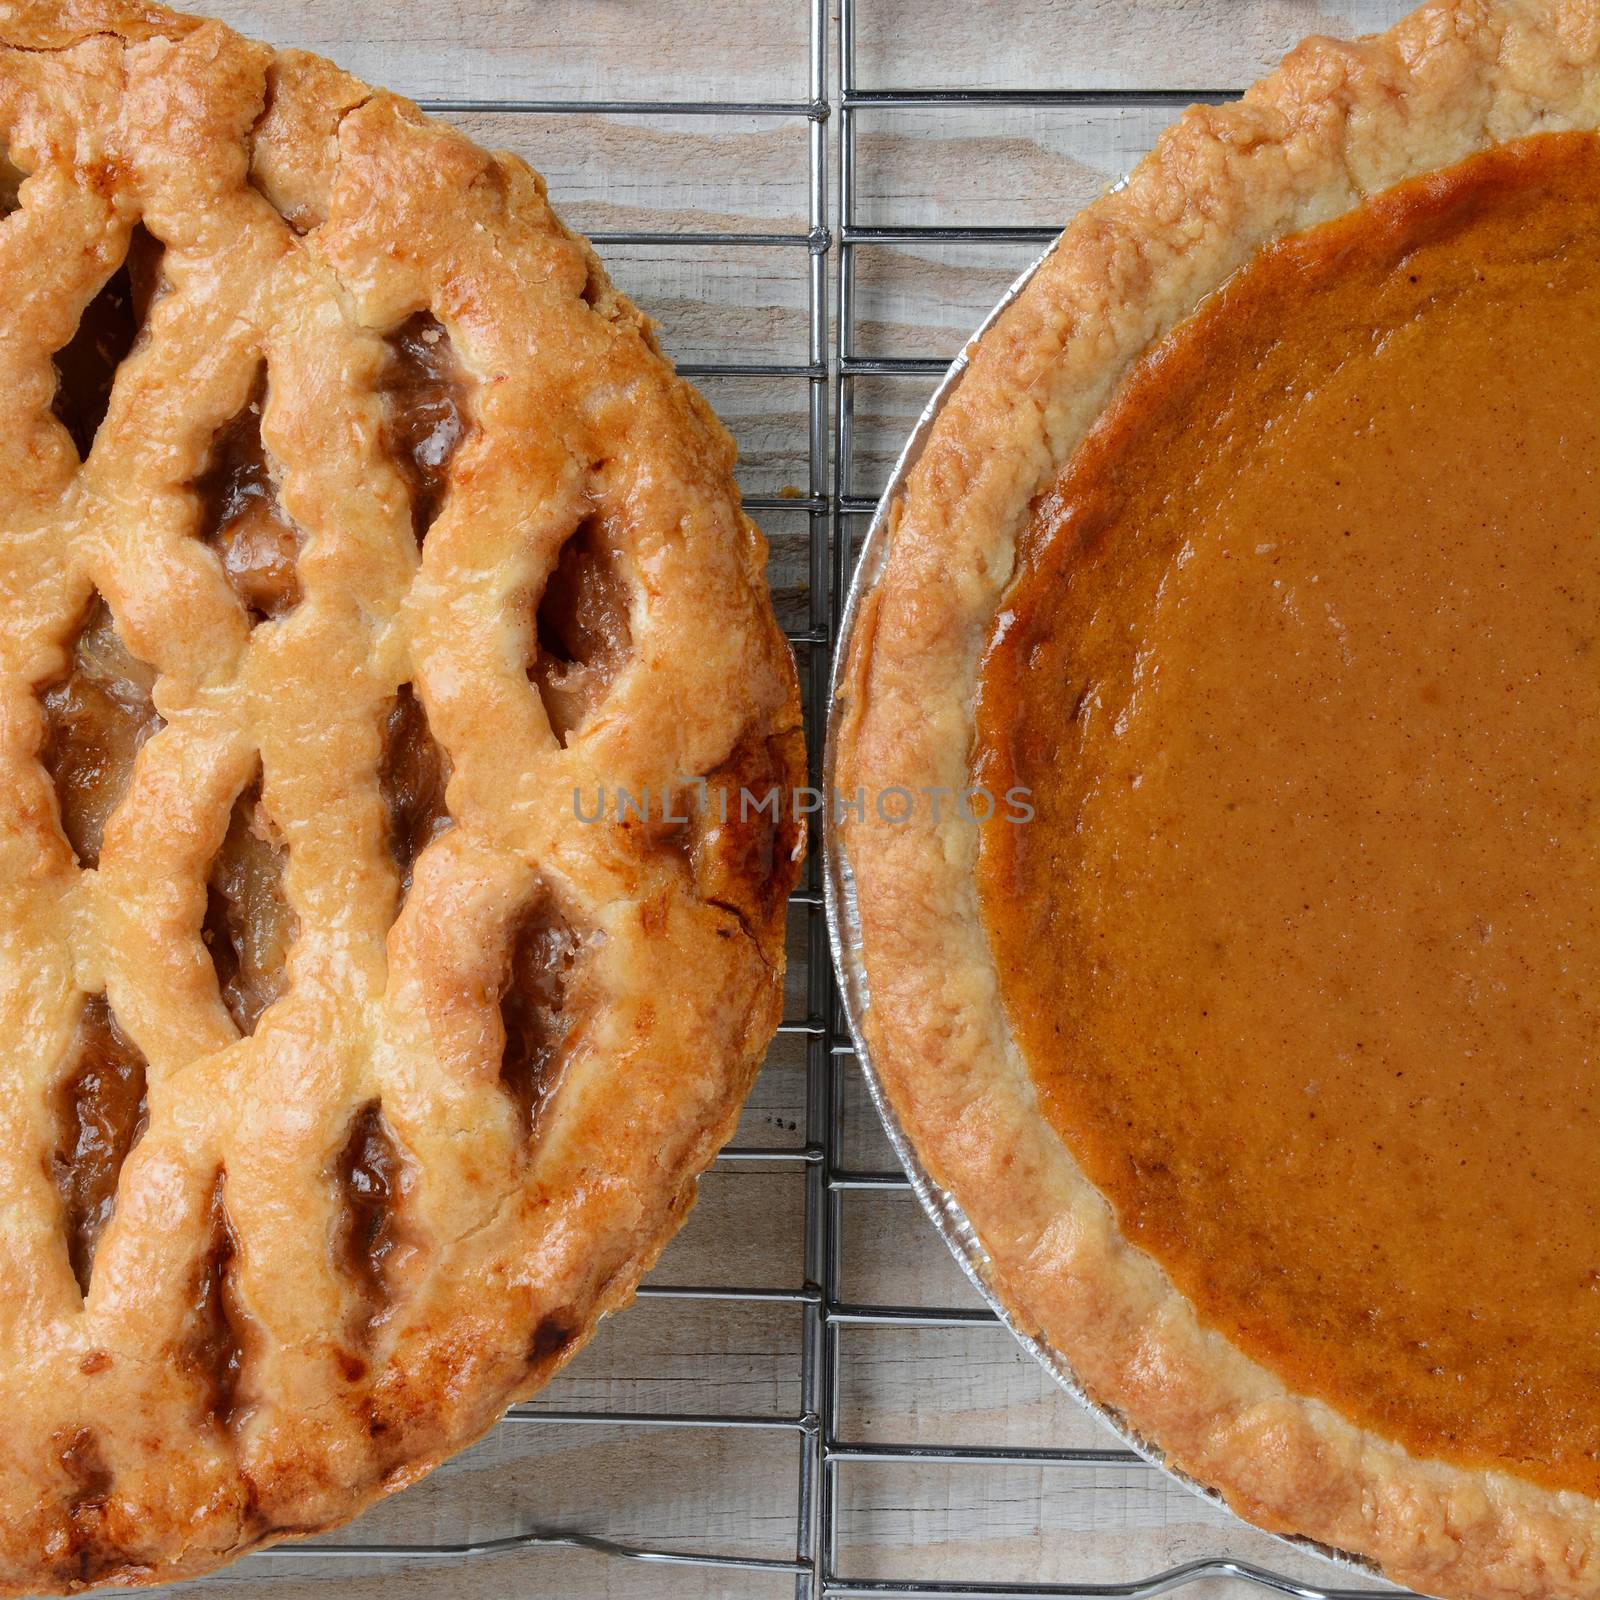 Closeup of holiday Apple and Pumpkin Pies on cooling racks. Only half of each pie is shown. Square format.